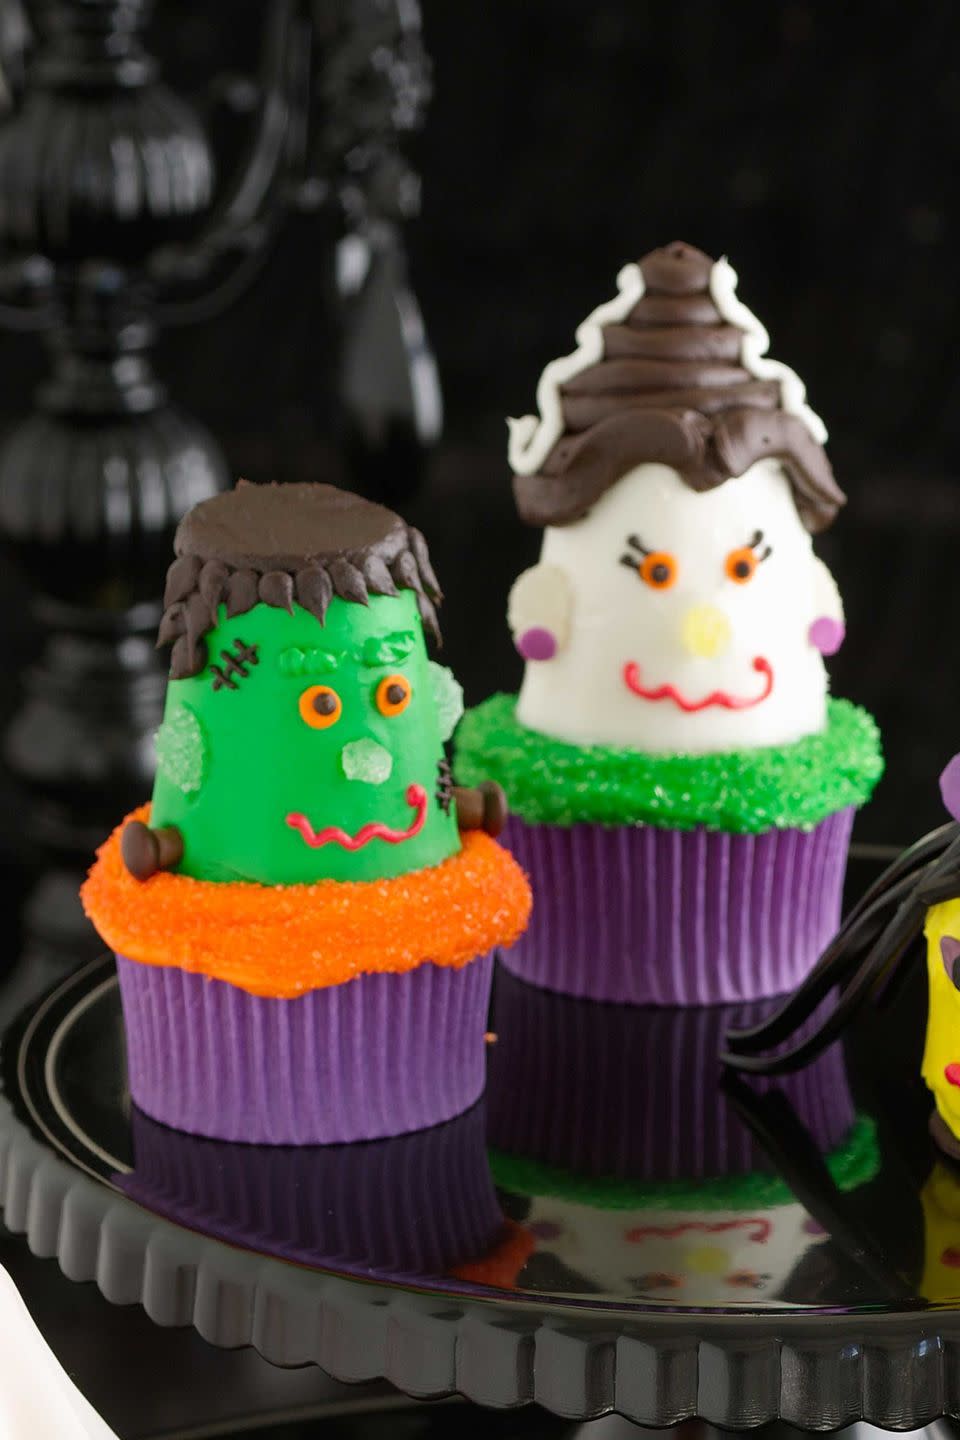 <p>After assembling these fun cupcakes, it's traditional to then cackle "They're alive" at the top of your lungs while lightning flashes. </p><p><strong><a href="https://www.countryliving.com/food-drinks/recipes/a31874/frankenstein-cupcakes-122189/" rel="nofollow noopener" target="_blank" data-ylk="slk:Get the recipe for Frankenstein Cupcakes" class="link ">Get the recipe for Frankenstein Cupcakes</a>.<br></strong></p><p><strong><a href="https://www.countryliving.com/food-drinks/recipes/a31748/bride-of-frankenstein-cupcakes-122190/" rel="nofollow noopener" target="_blank" data-ylk="slk:Get the recipe for Bride of Frankenstein Cupcakes" class="link ">Get the recipe for Bride of Frankenstein Cupcakes</a>.<br></strong></p>